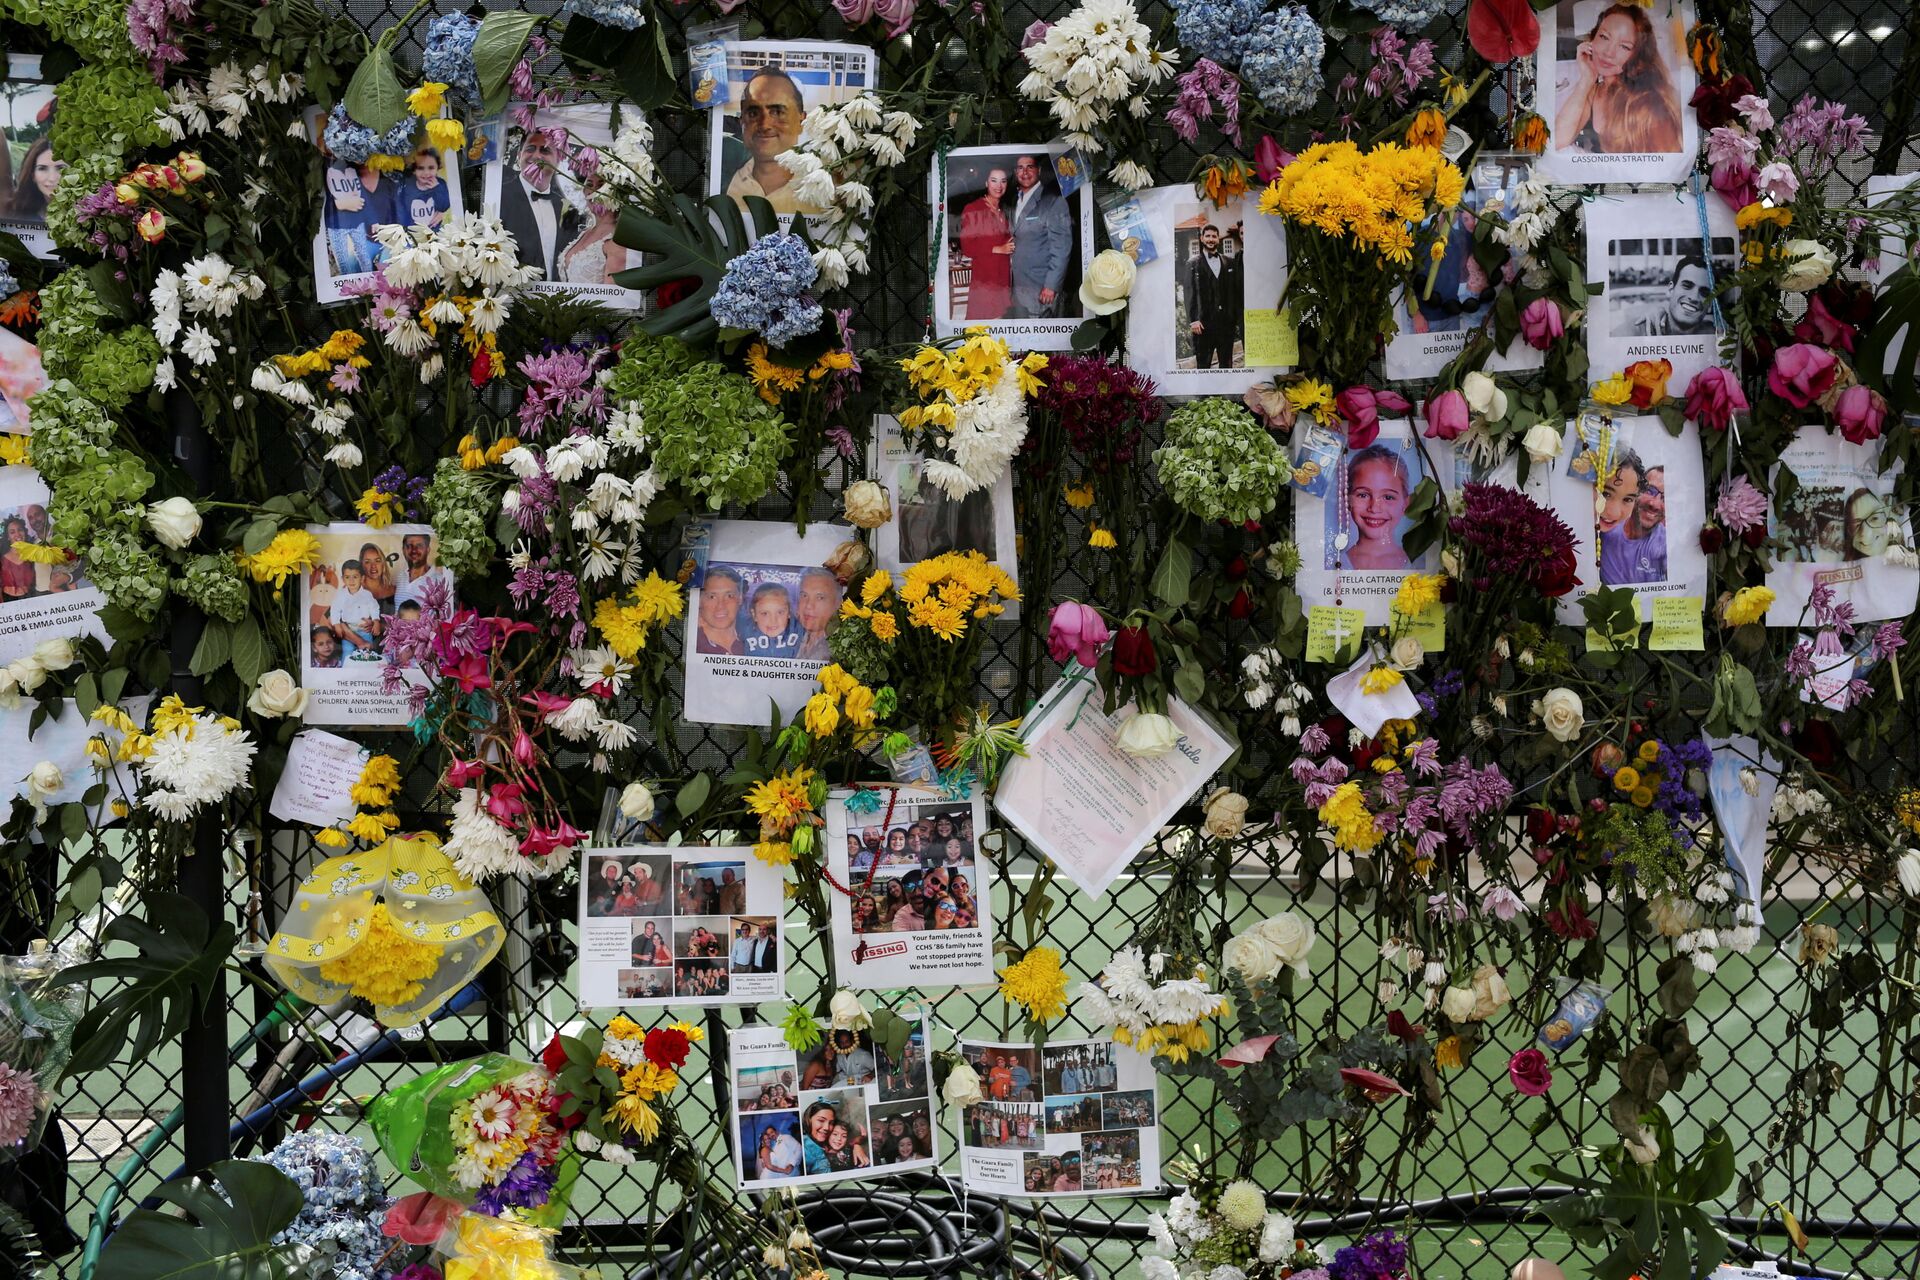 Photos and flowers hang in a fence at a memorial site created by neighbors in front of a partially collapsed residential building as the emergency crews continue search and rescue operations for survivors, in Surfside, near Miami Beach, Florida, U.S. June 29, 2021 - Sputnik International, 1920, 07.09.2021